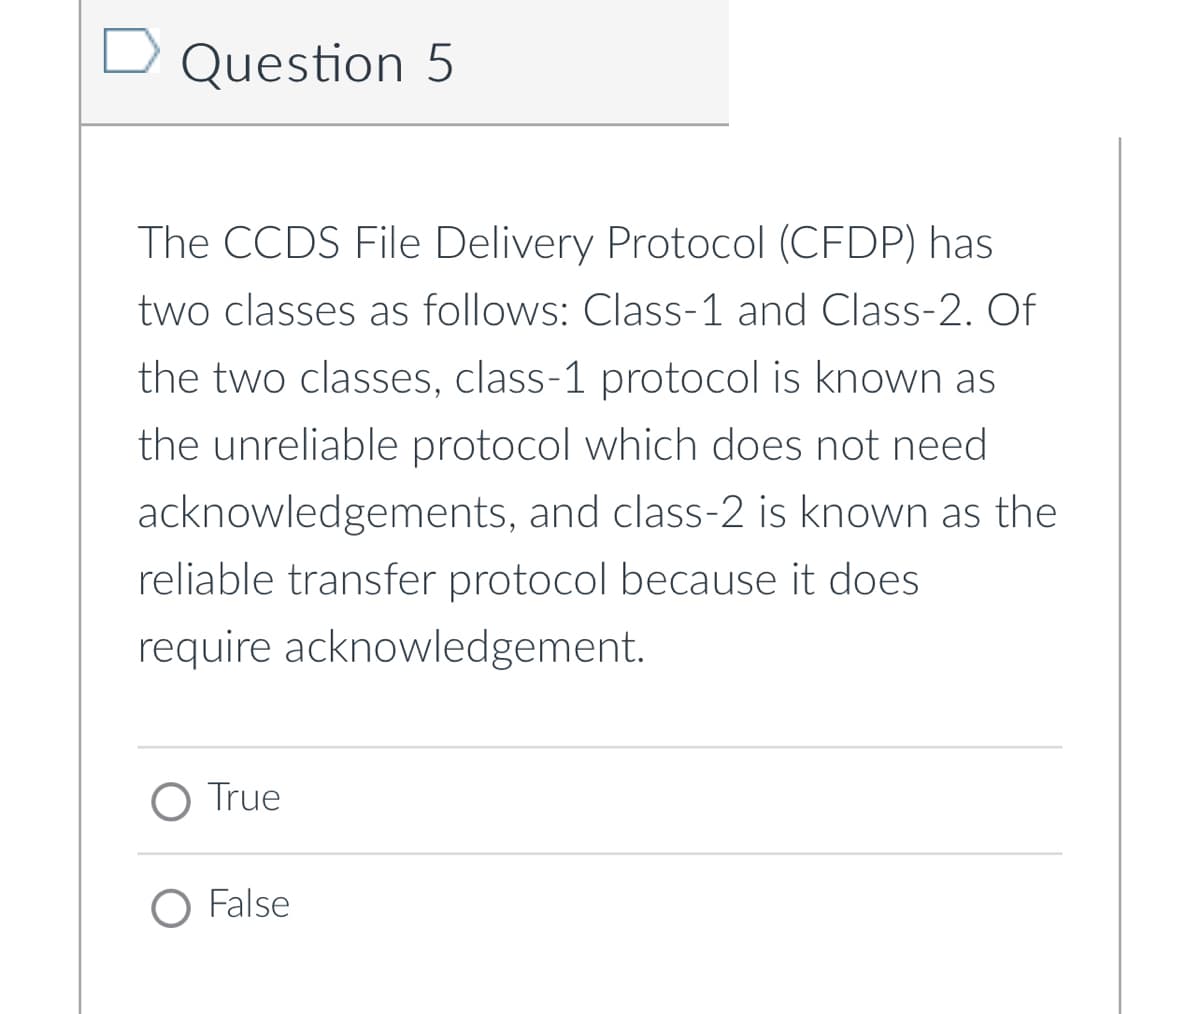 Question 5
The CCDS File Delivery Protocol (CFDP) has
two classes as follows: Class-1 and Class-2. Of
the two classes, class-1 protocol is known as
the unreliable protocol which does not need
acknowledgements, and class-2 is known as the
reliable transfer protocol because it does
require acknowledgement.
O True
O False
